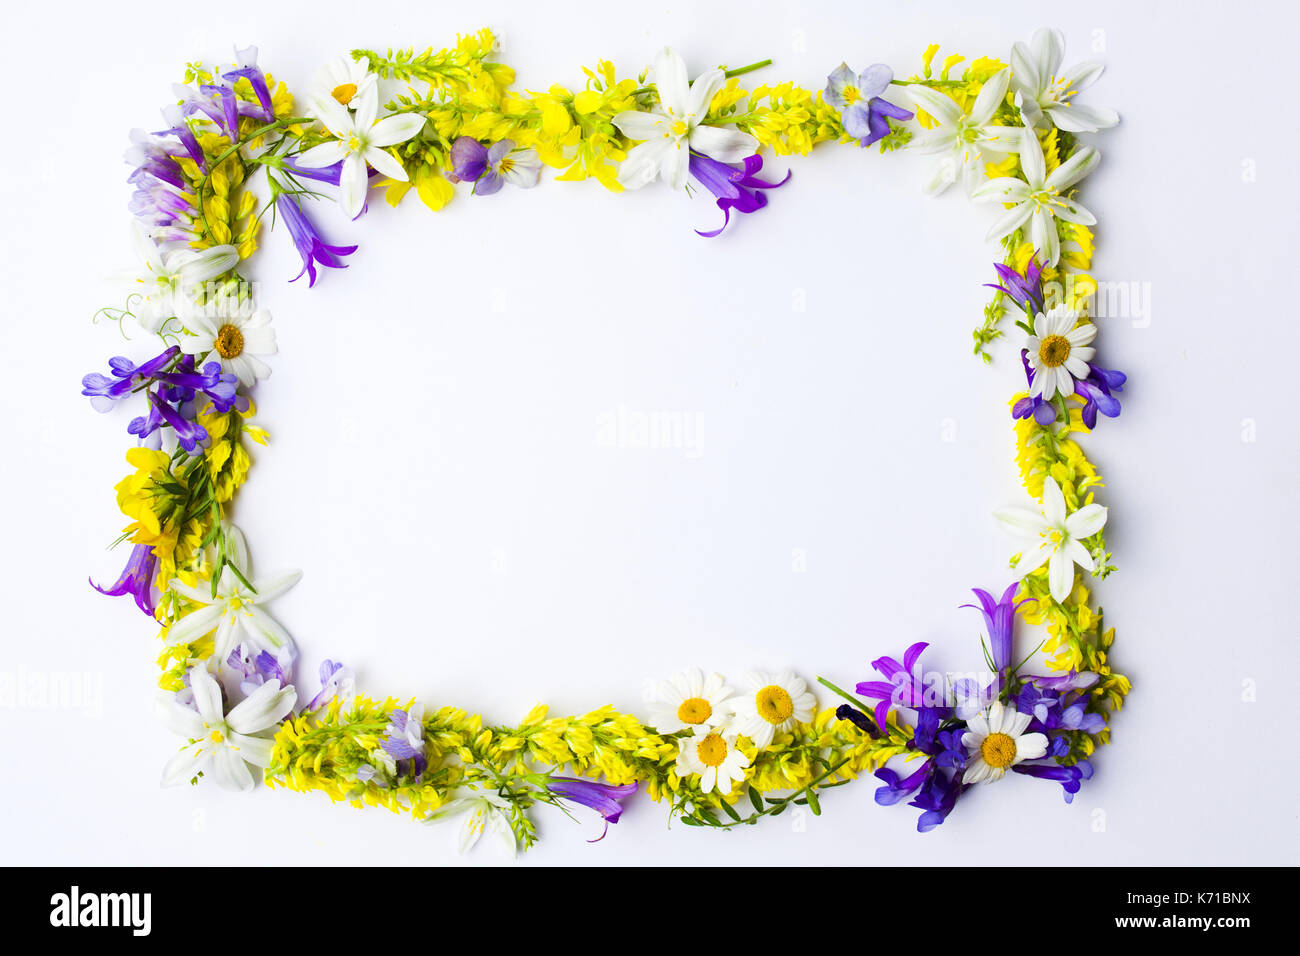 Wildflowers arrangement with copyspace on white Stock Photo